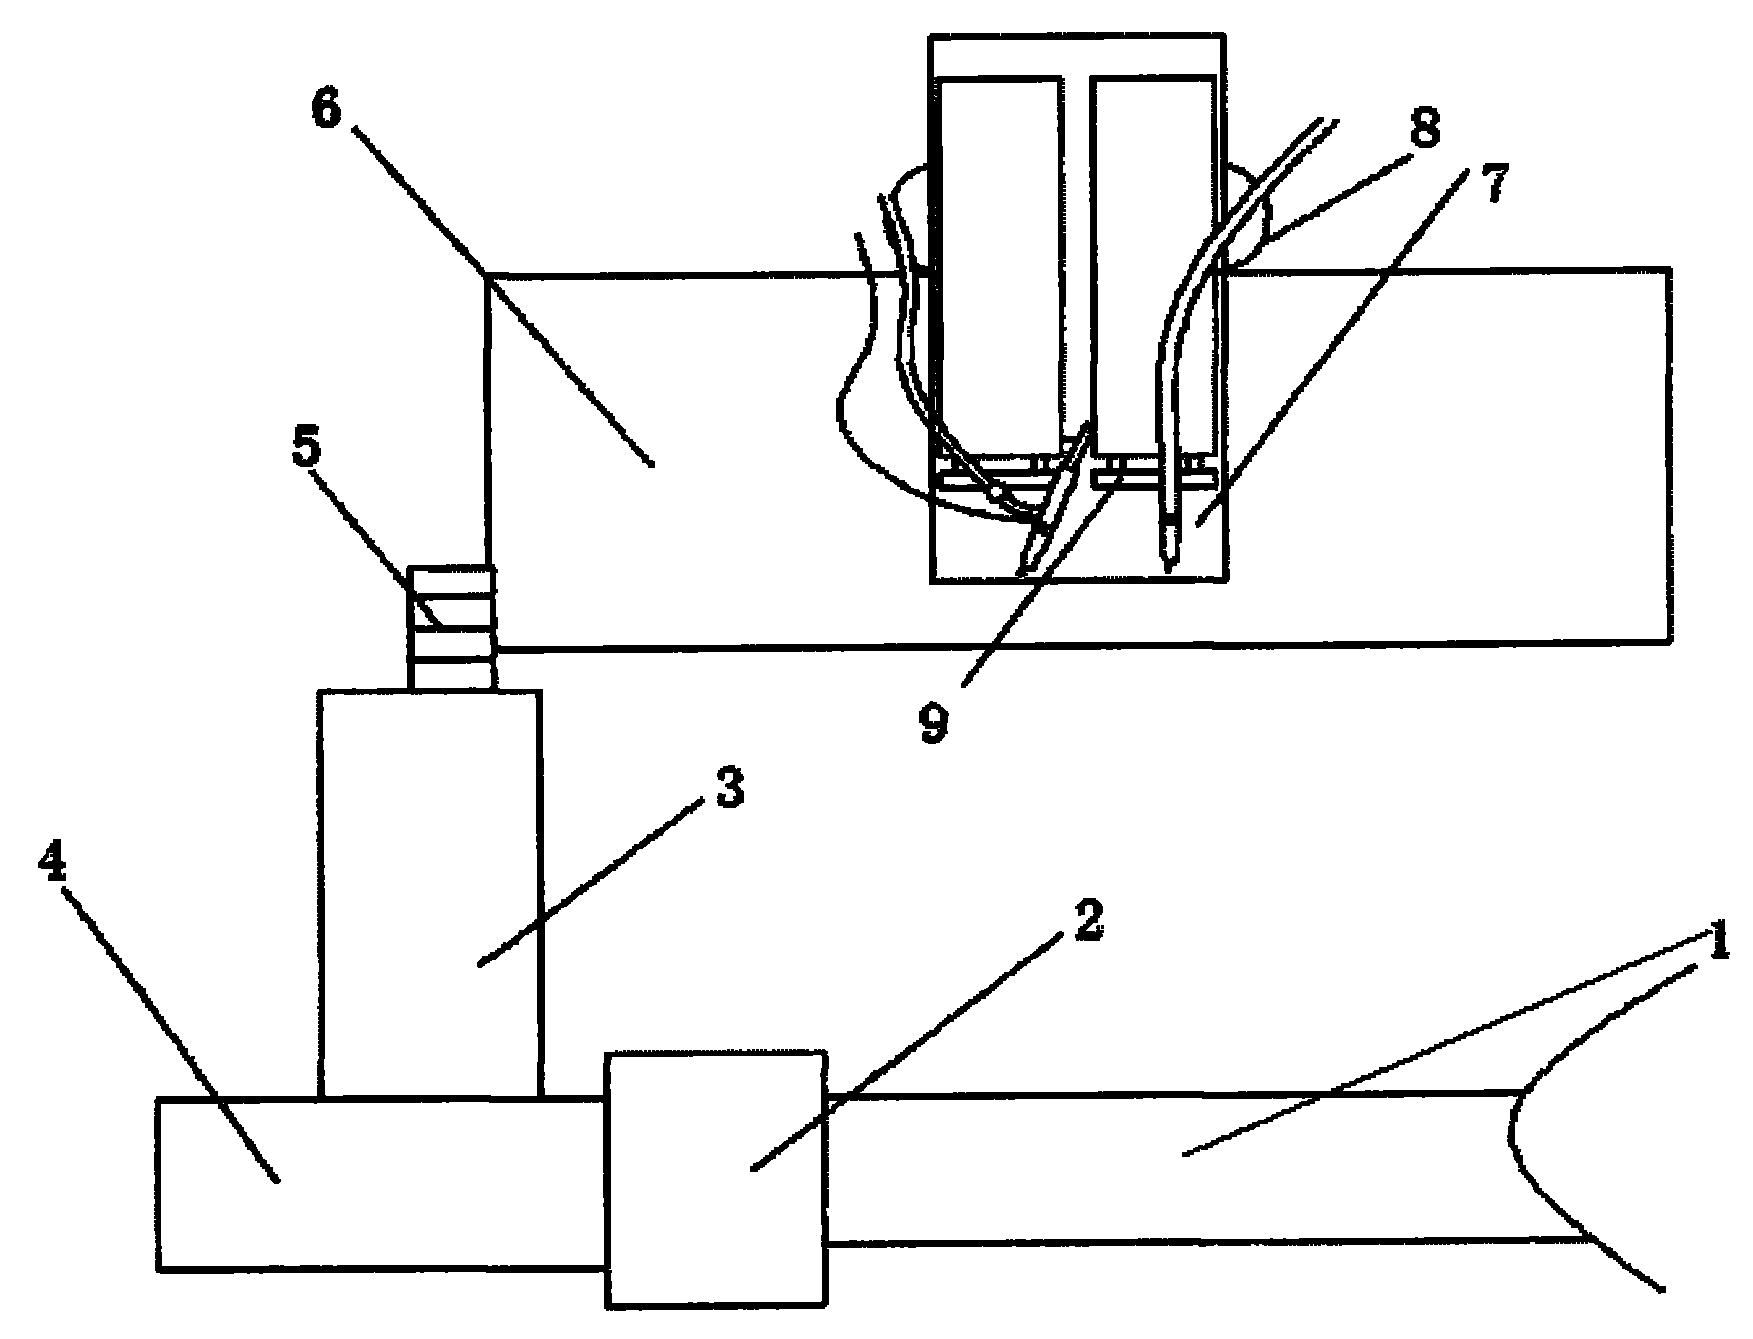 Full-automatic numerical control welding method and equipment